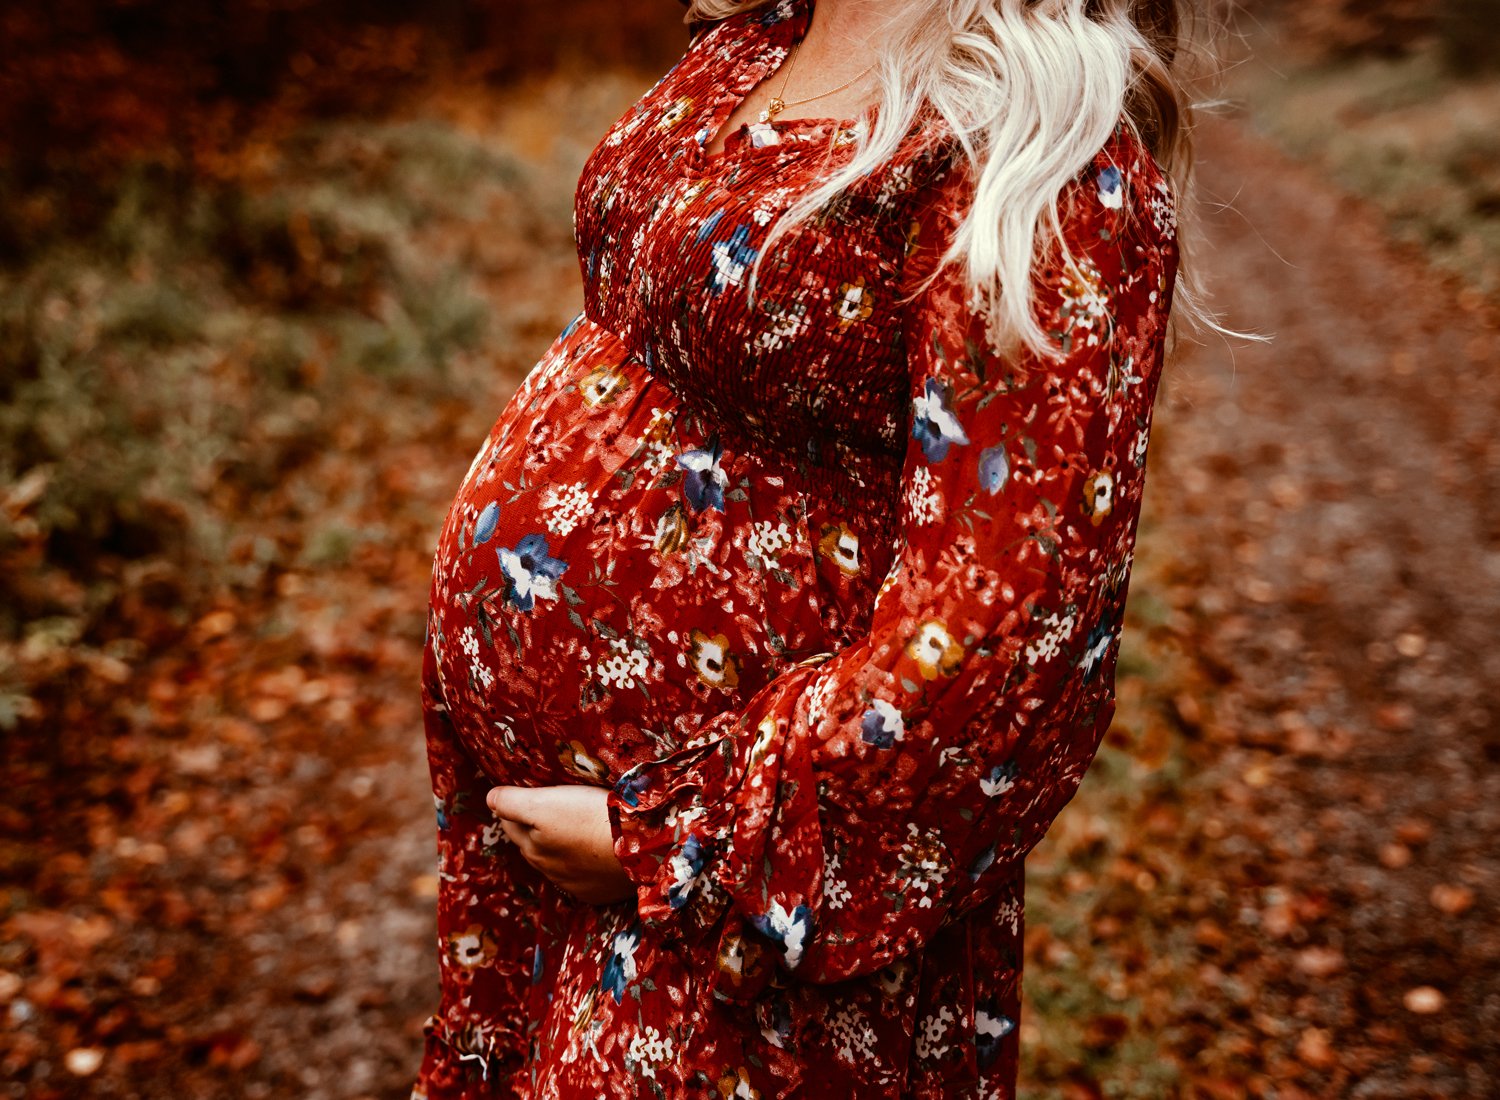 moody-maternity-couple-session-in-fall-season-in-wooded-forest-in-germany-by-motherhood-photographer-sarah-havens-ramtein (7).jpg